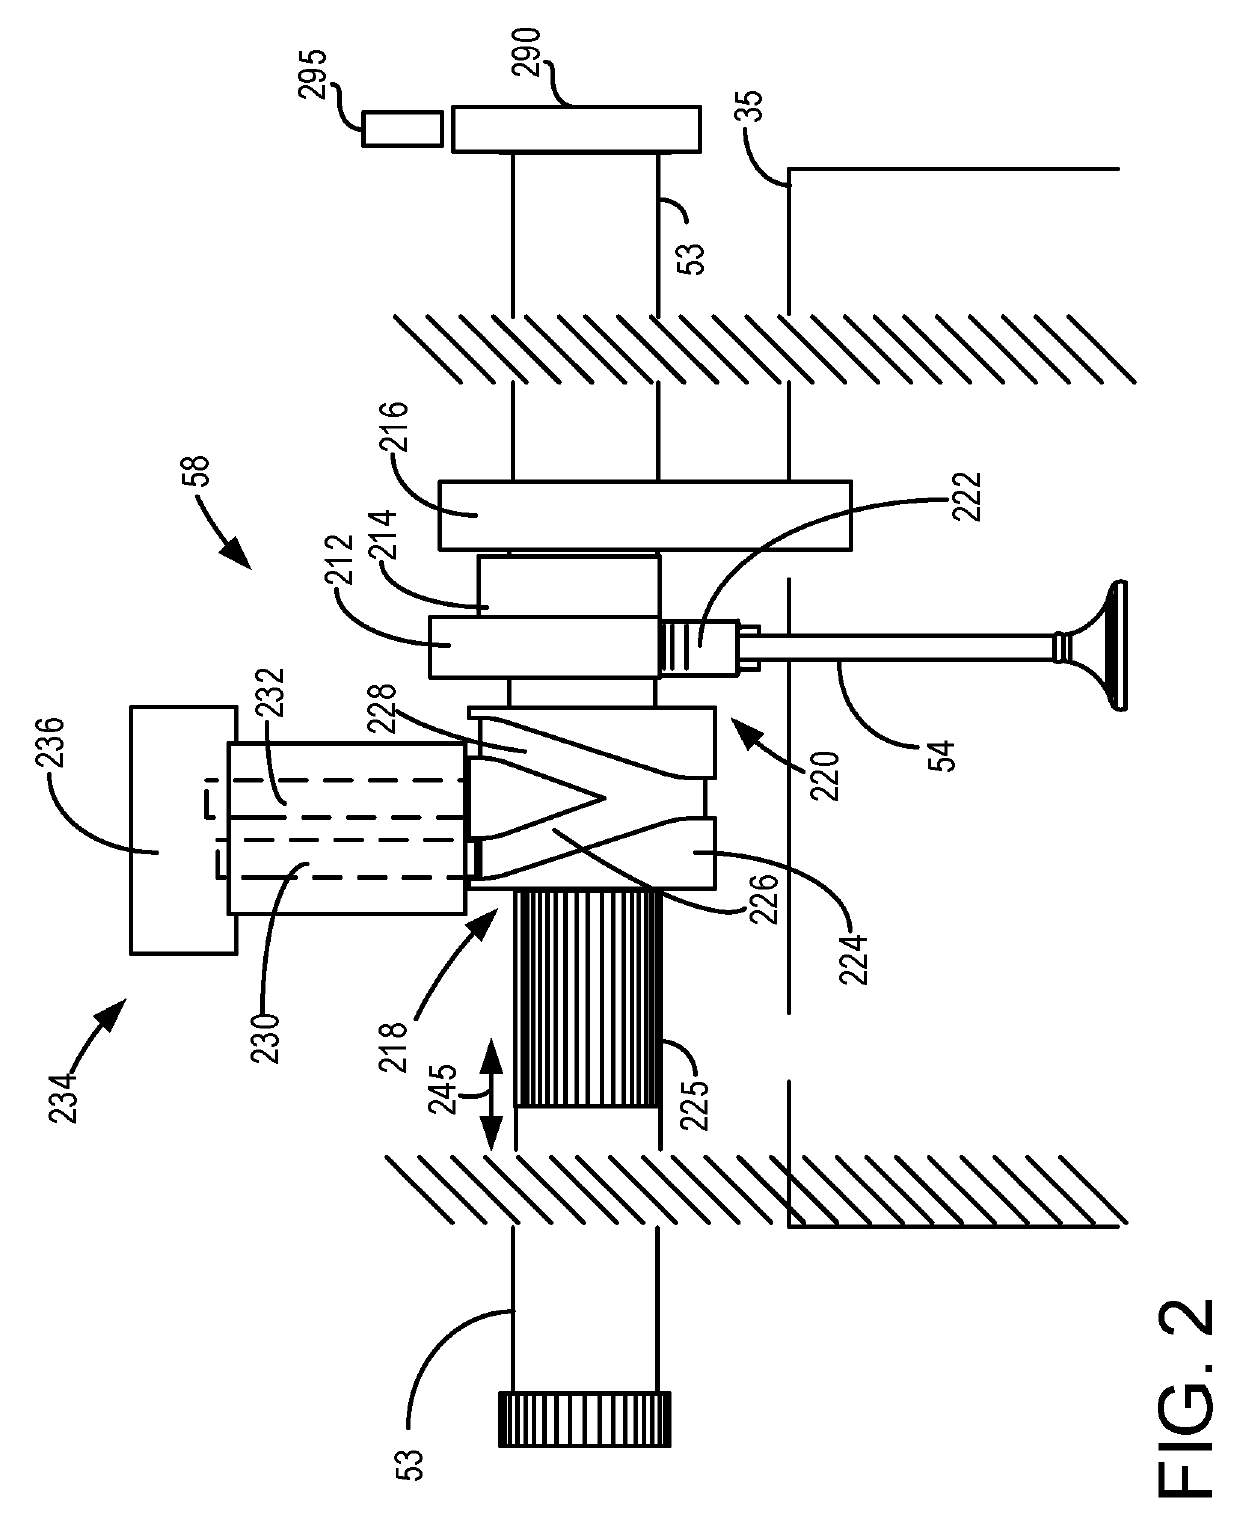 System and method for diagnosing a variable displacement engine